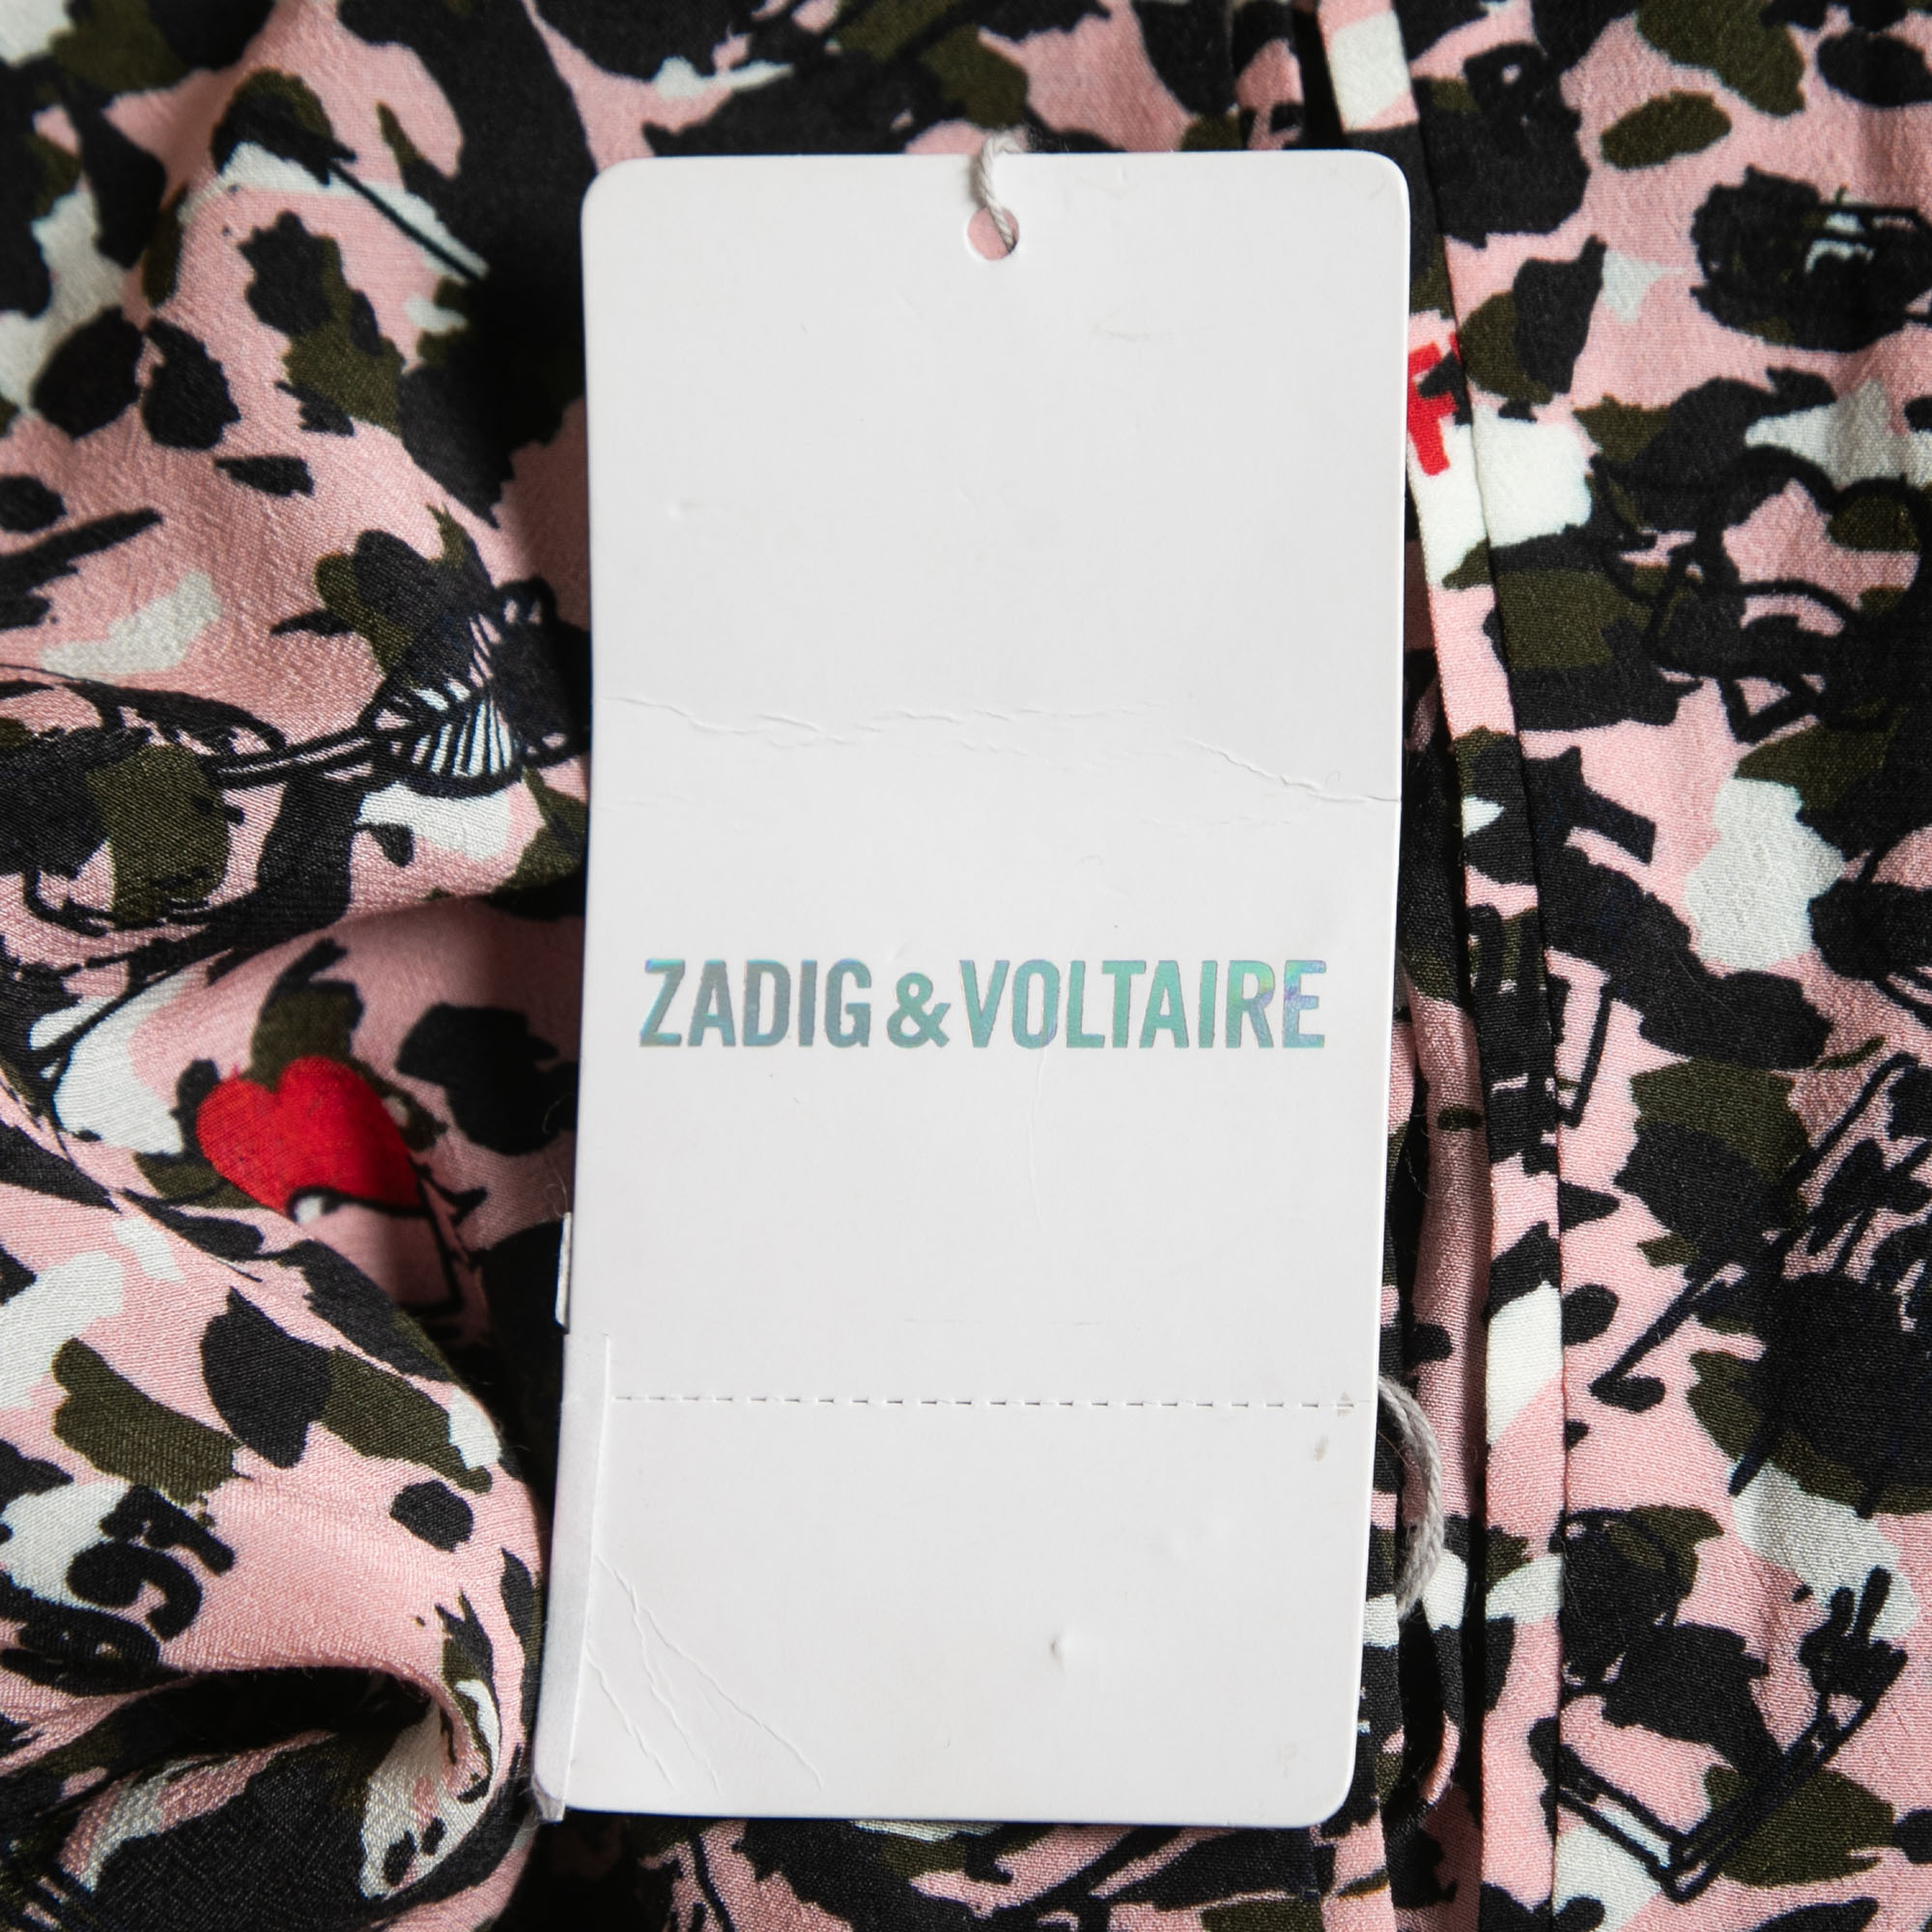 Zadig And Voltaire Black/Pink Printed Crepe Reversible Bomber Jacket S